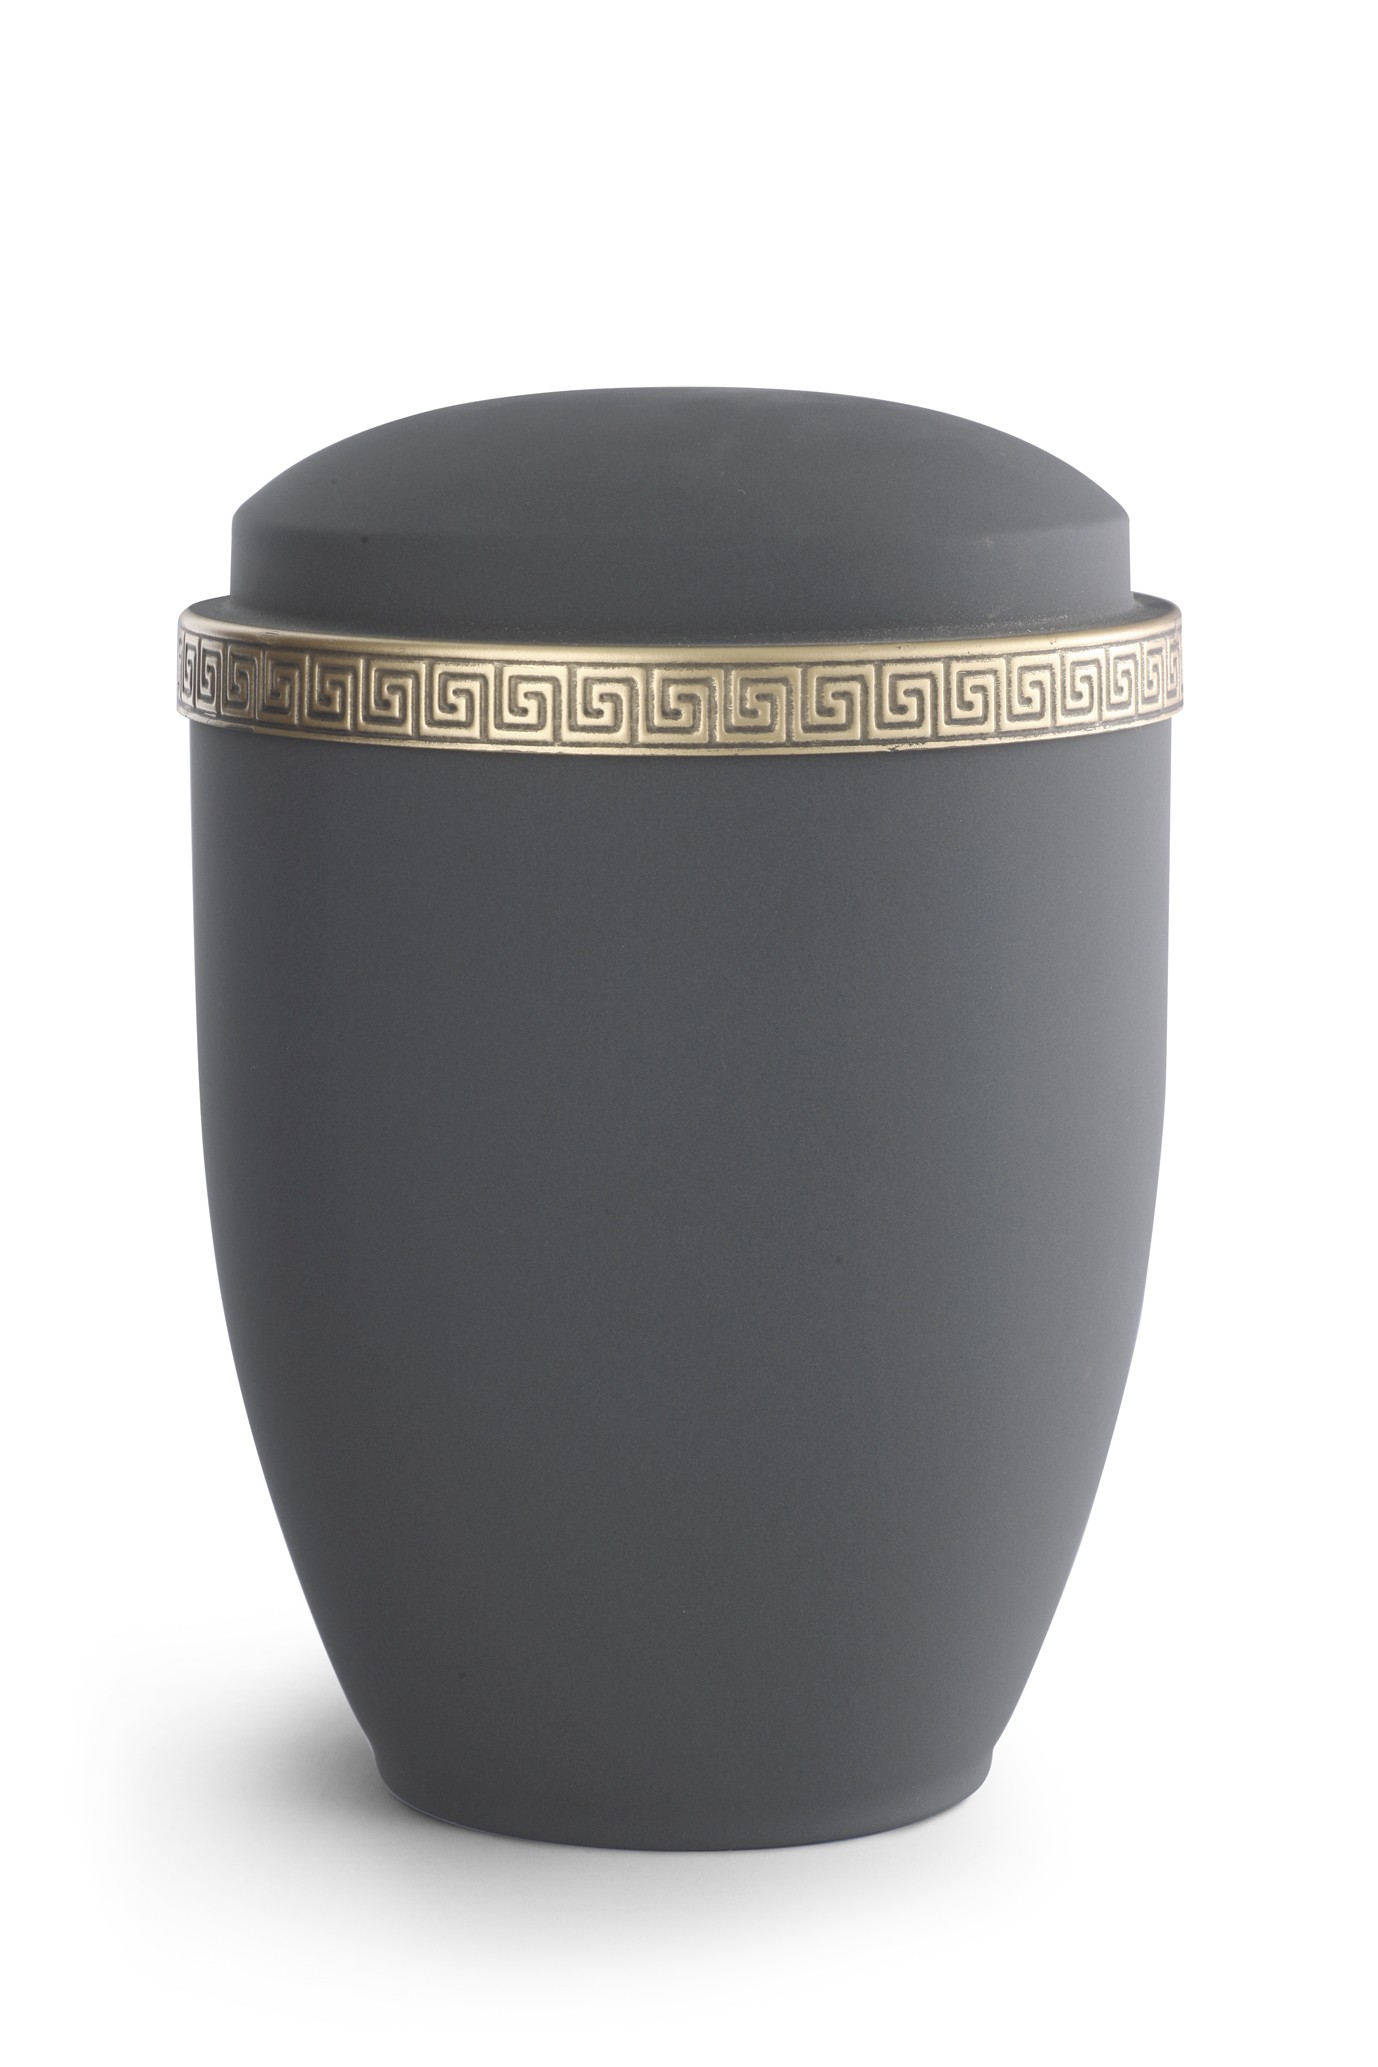 graphite-steel-metal-with-meander-greek-art-band-funeral-cremation-ashes-urn-for-adult-736